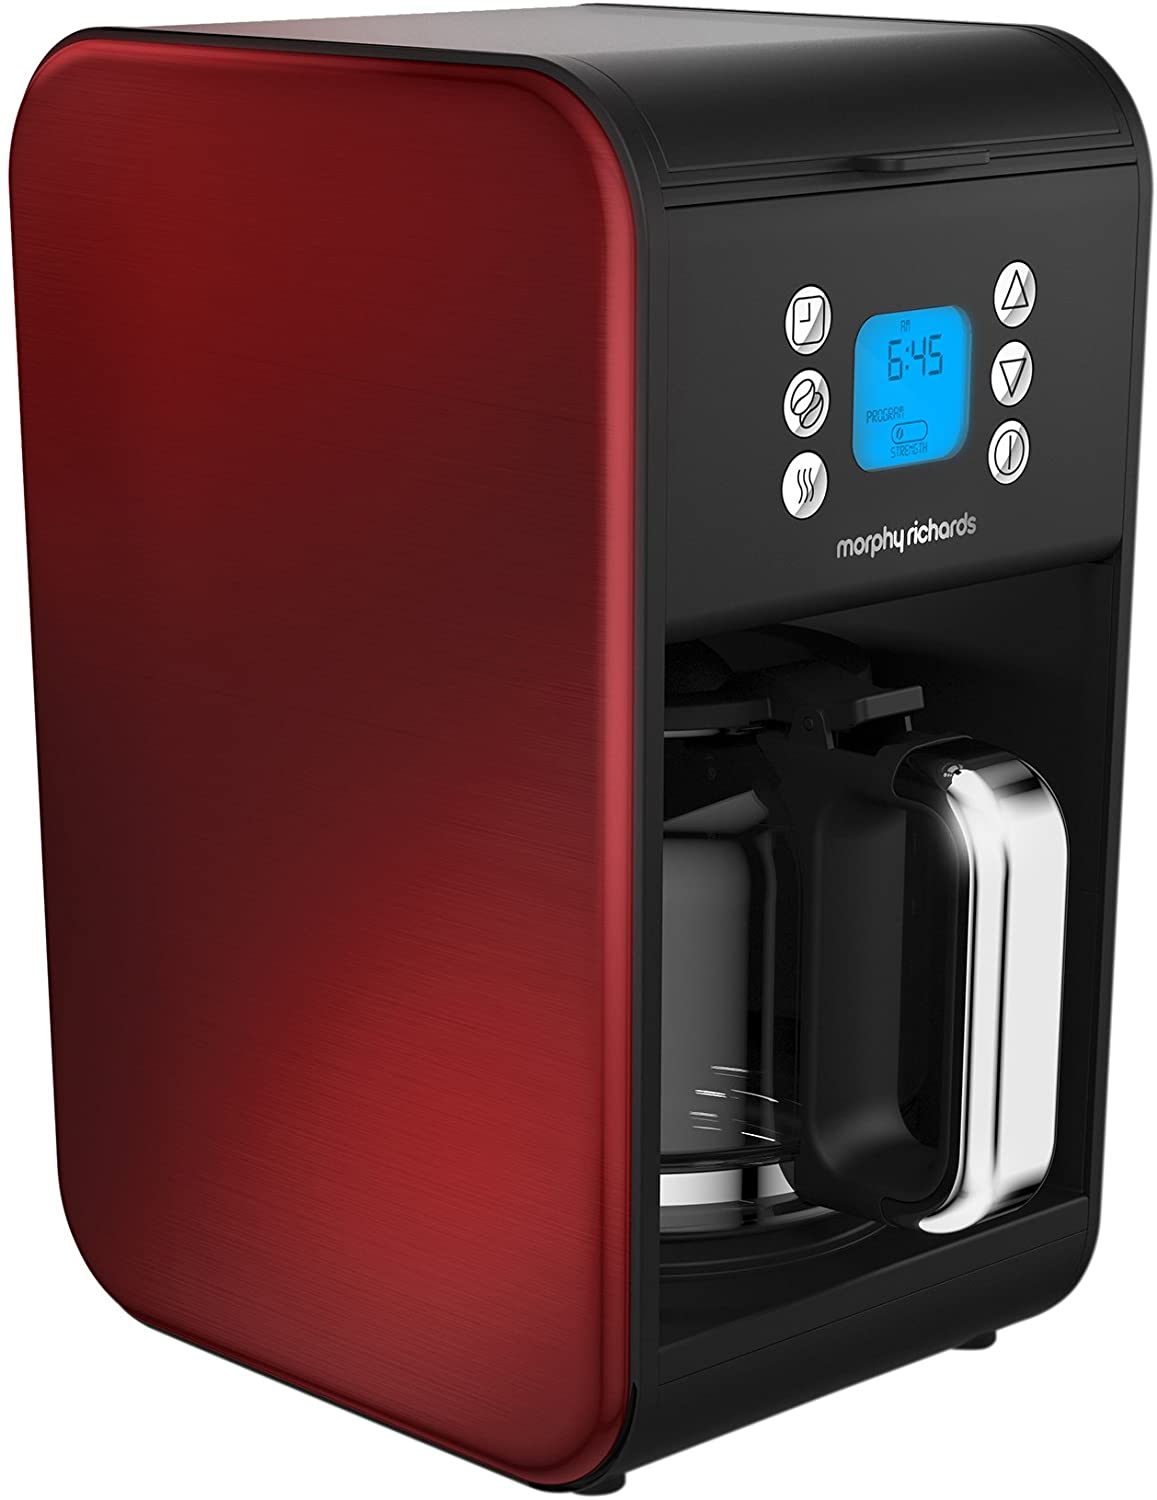 Morphy Richards 162009, Red